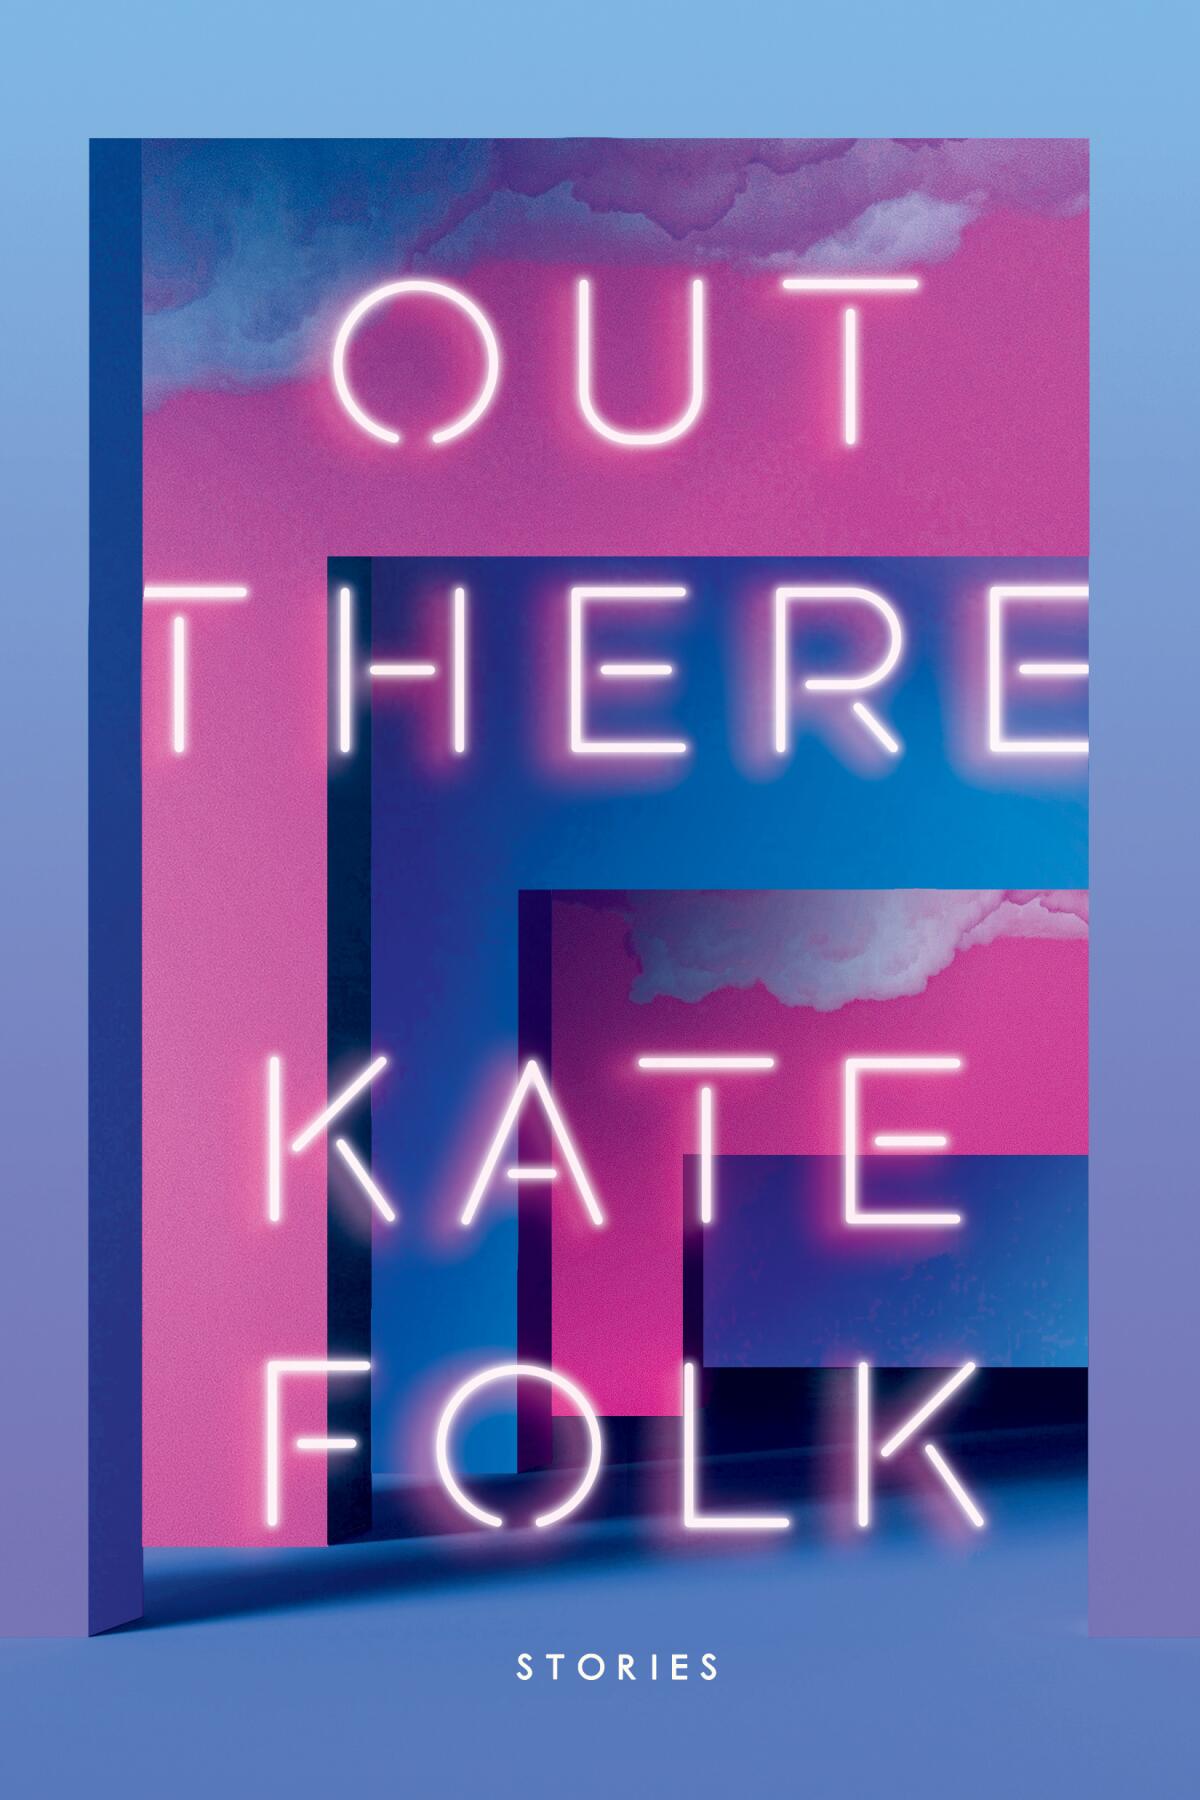 "Out There," by Kate Folk